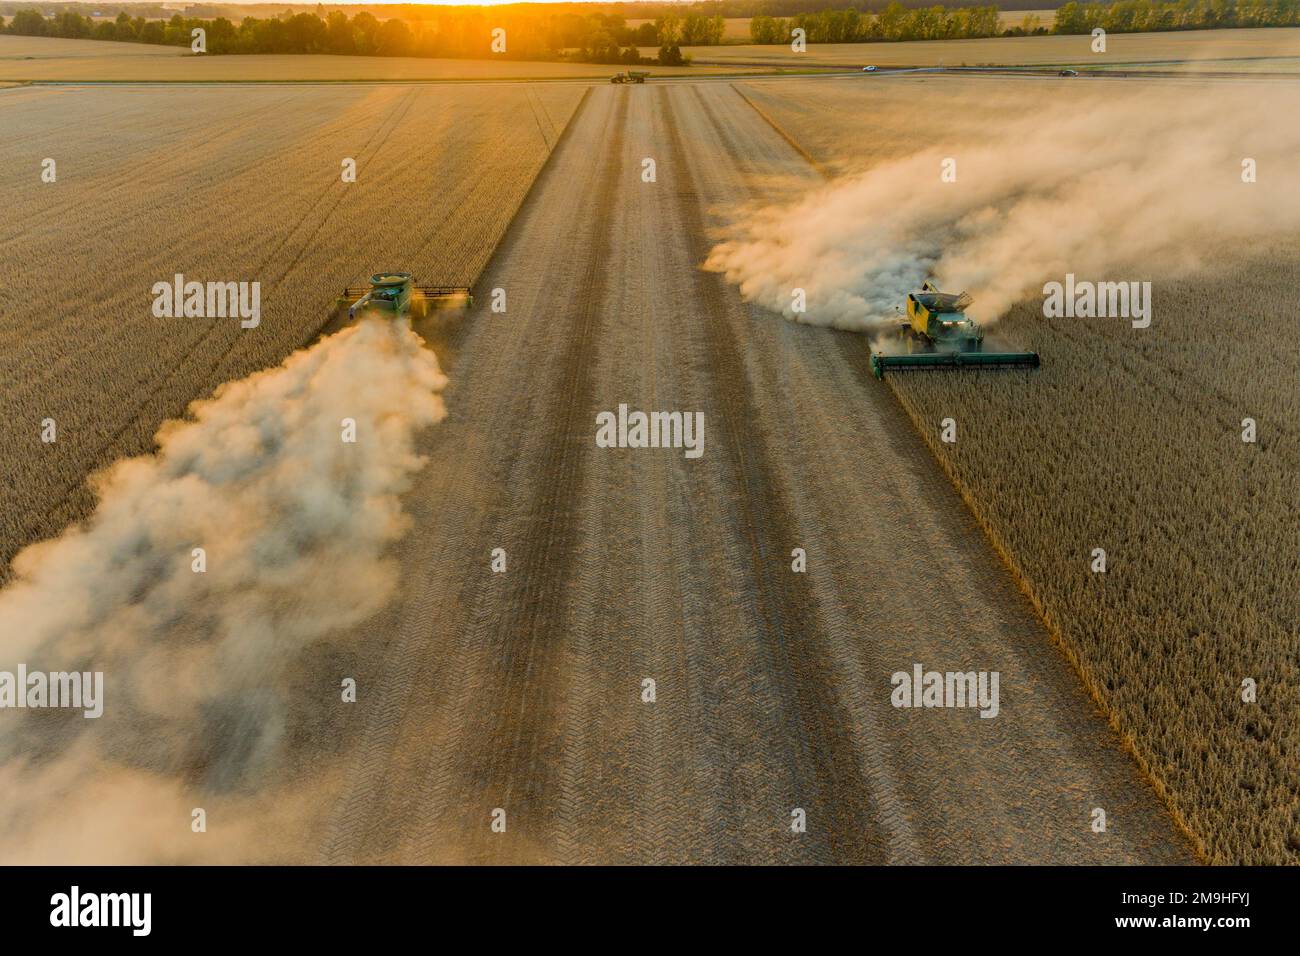 Aerial view of combines harvesting soybeans at sunset, Marion County, Illinois, USA Stock Photo